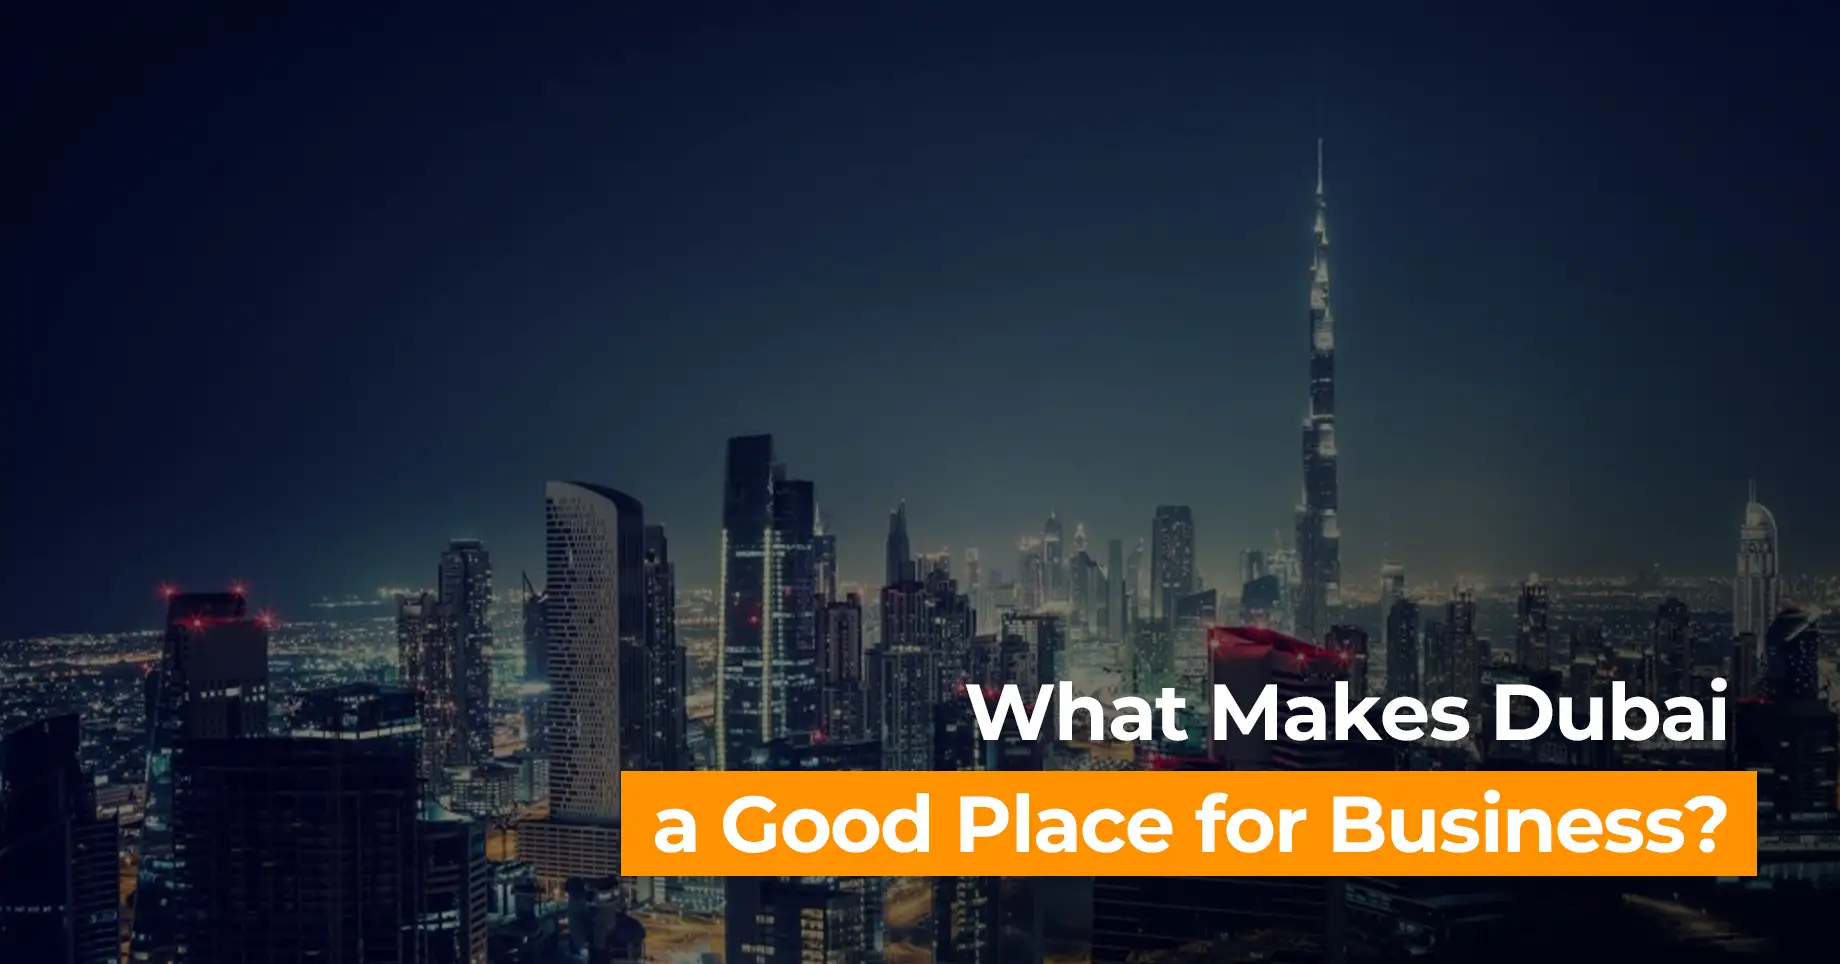 What Makes Dubai a Good Place for Business?